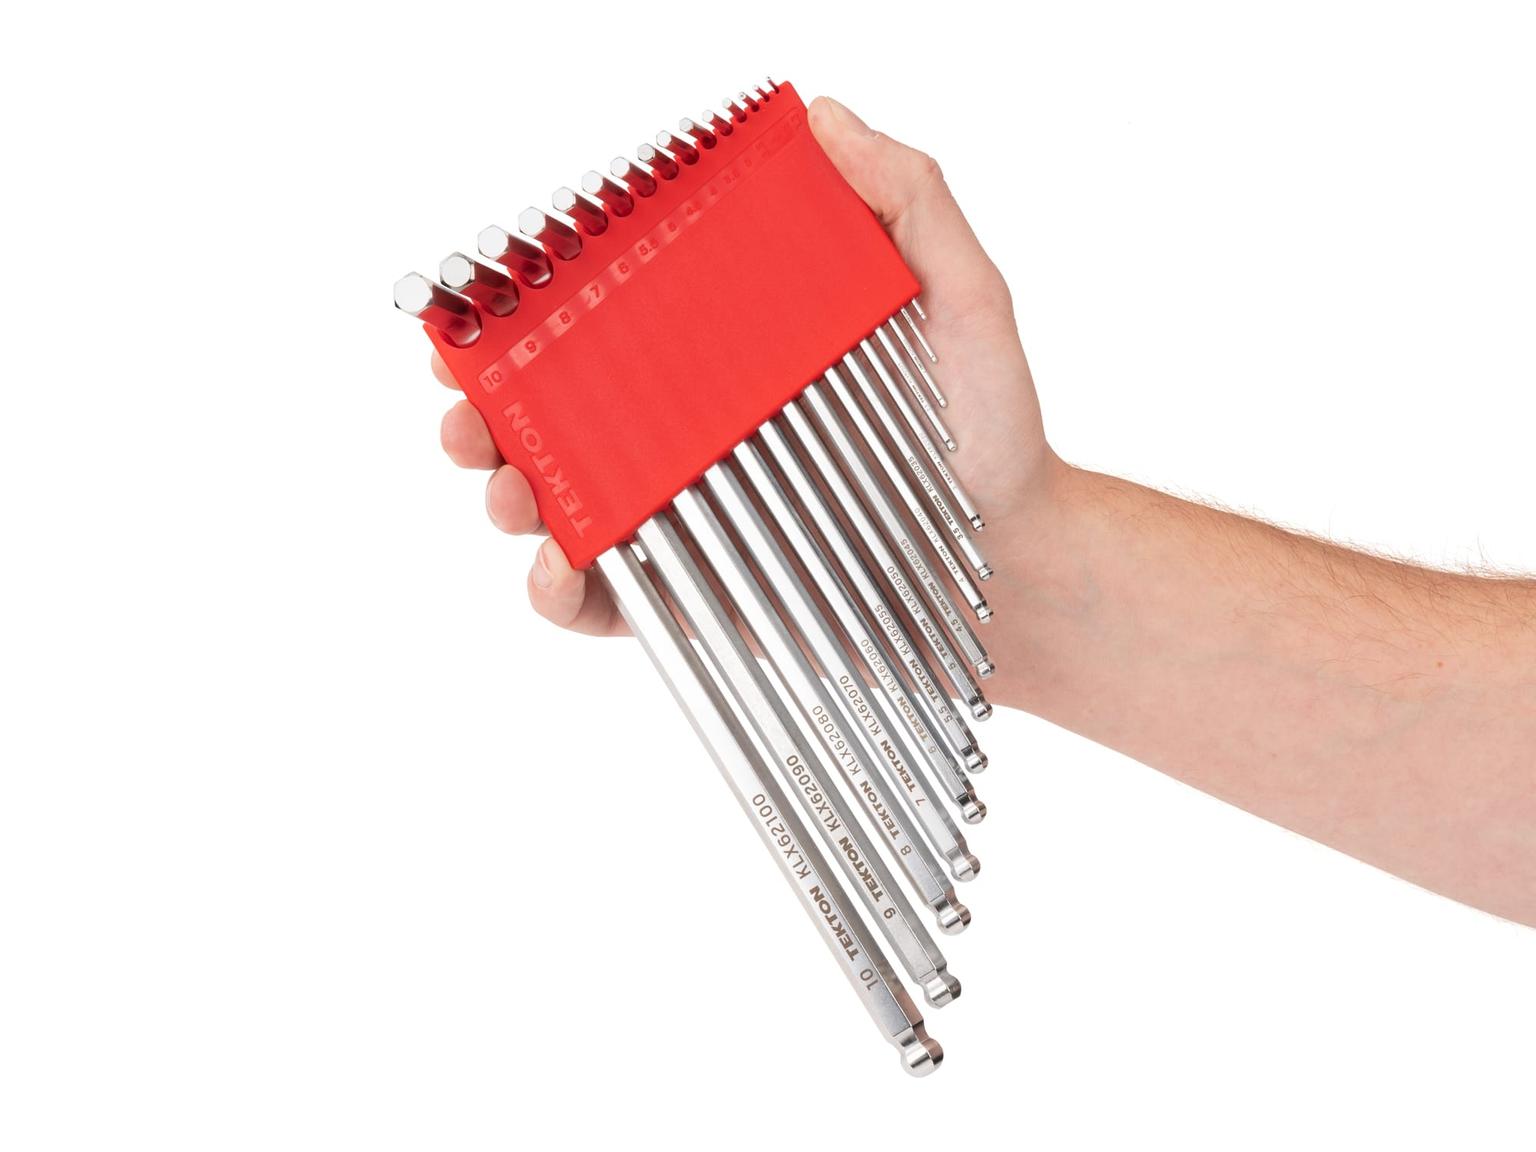 TEKTON KLX91301-D Ball End Hex Key Set with Holder, 28-Piece (0.050-3/8 in., 1.3-10 mm)